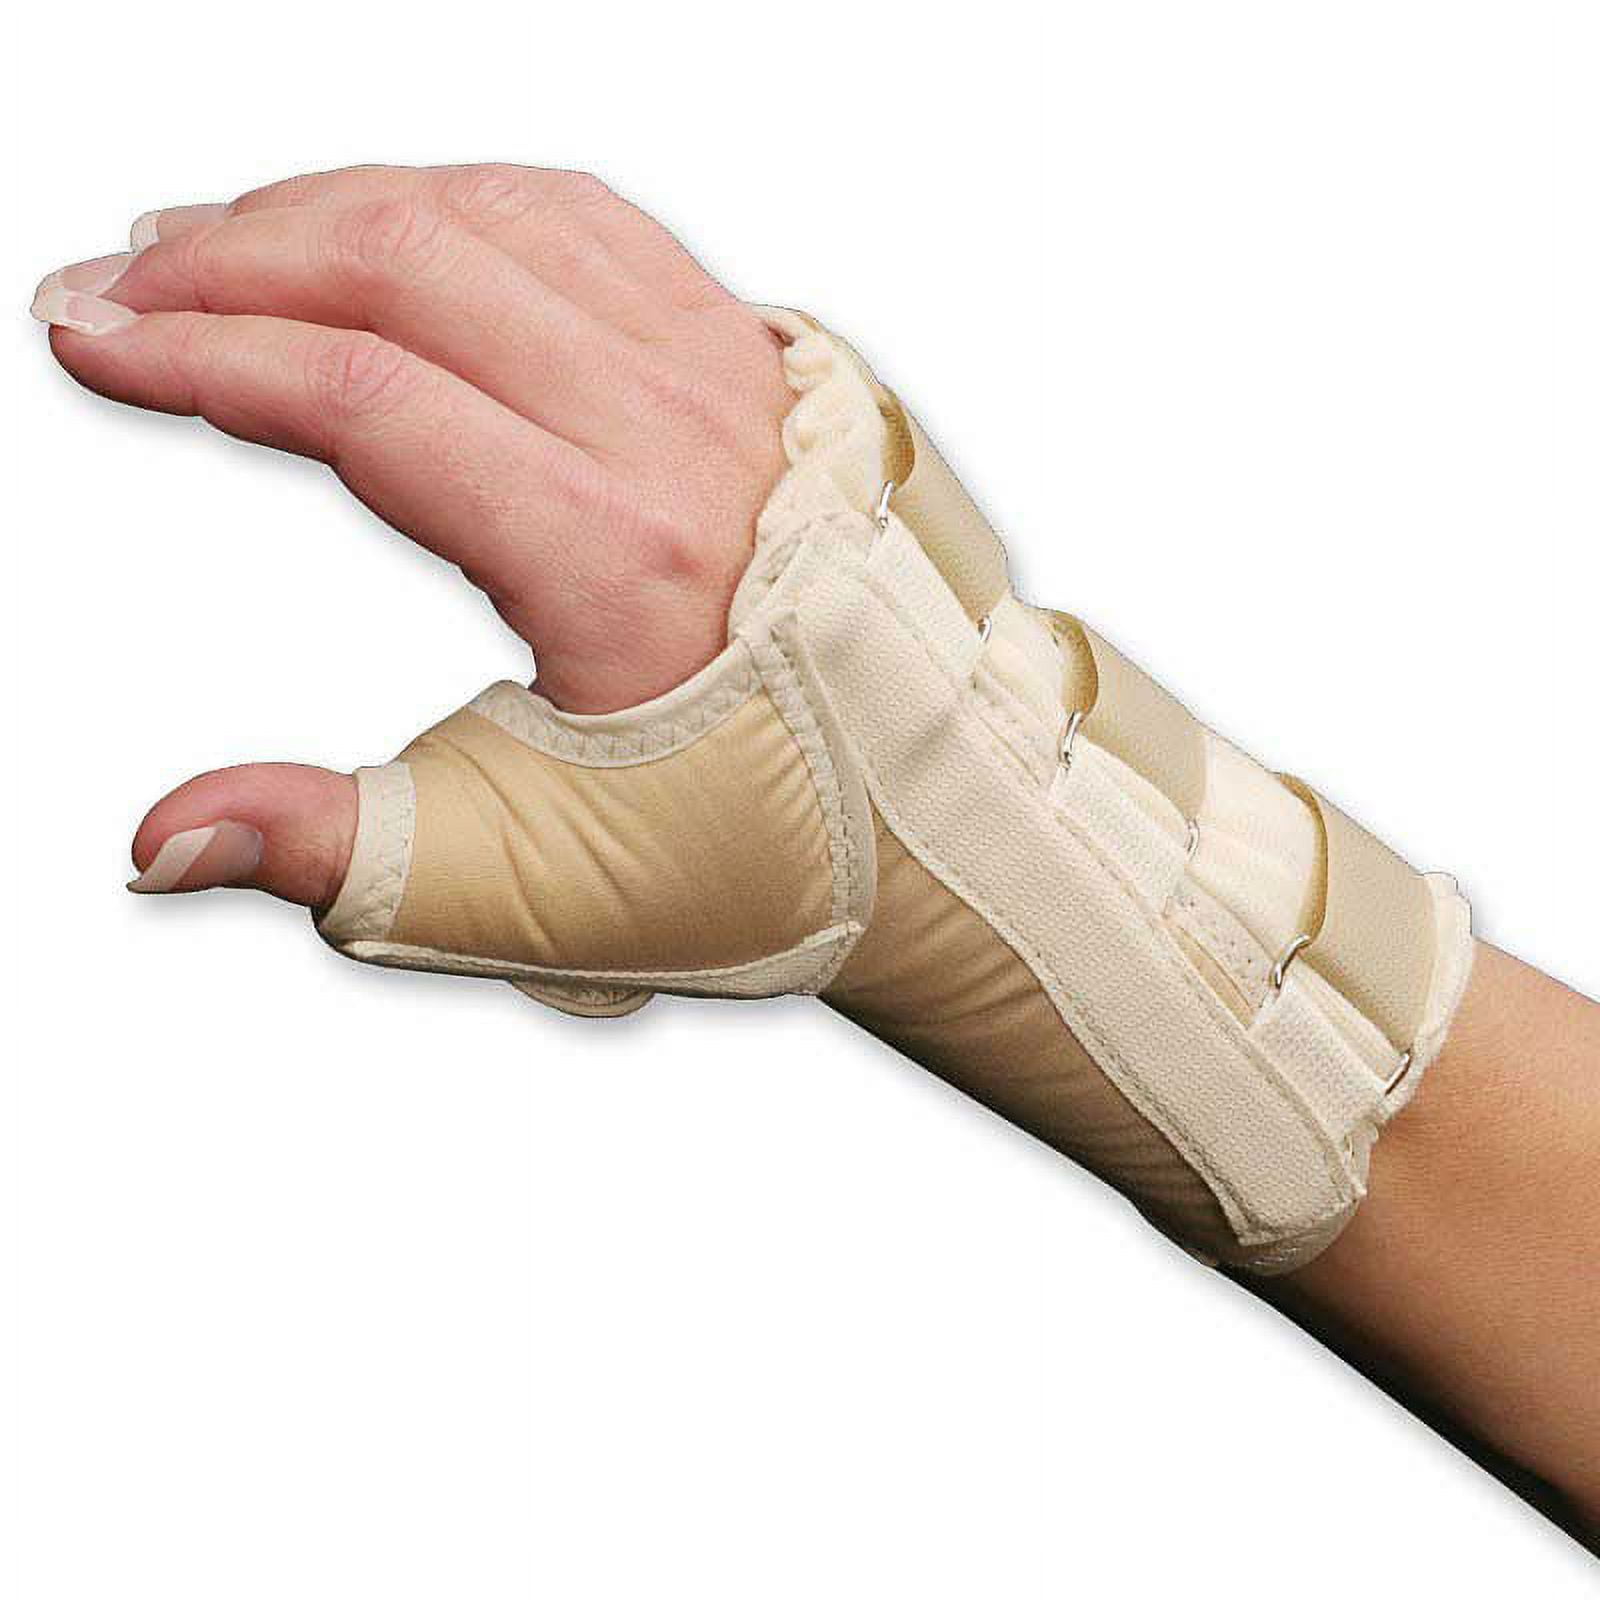 Vive Night Wrist Splint Brace - Left, Right Hand Sleep Support Wrap -  Breathable & Lightweight Cushion Compression Arm Stabilizer for Carpal  Tunnel